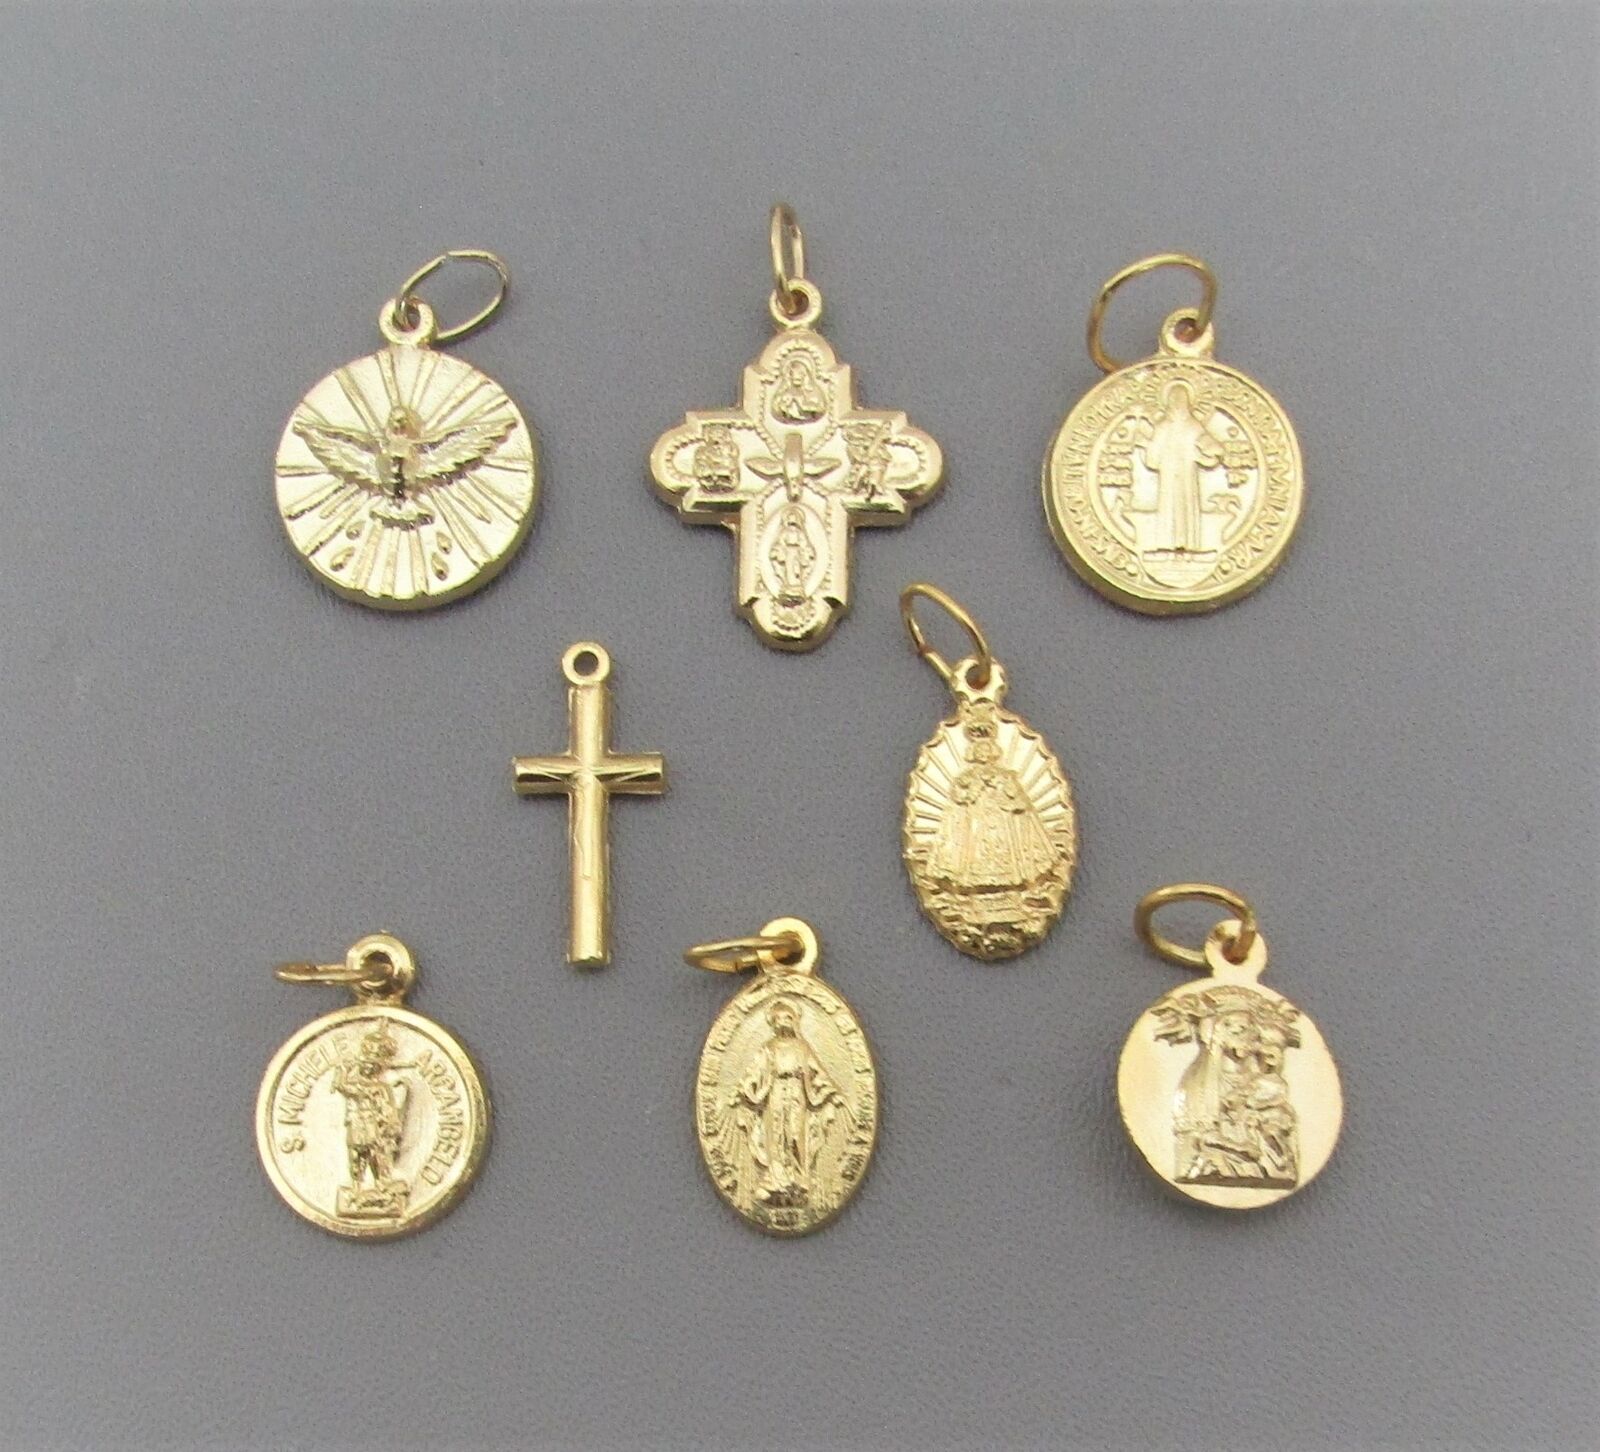 Lot 8 Small Holy Medals Cross for Rosary Bracelet Miraculous St. Michael GOLD